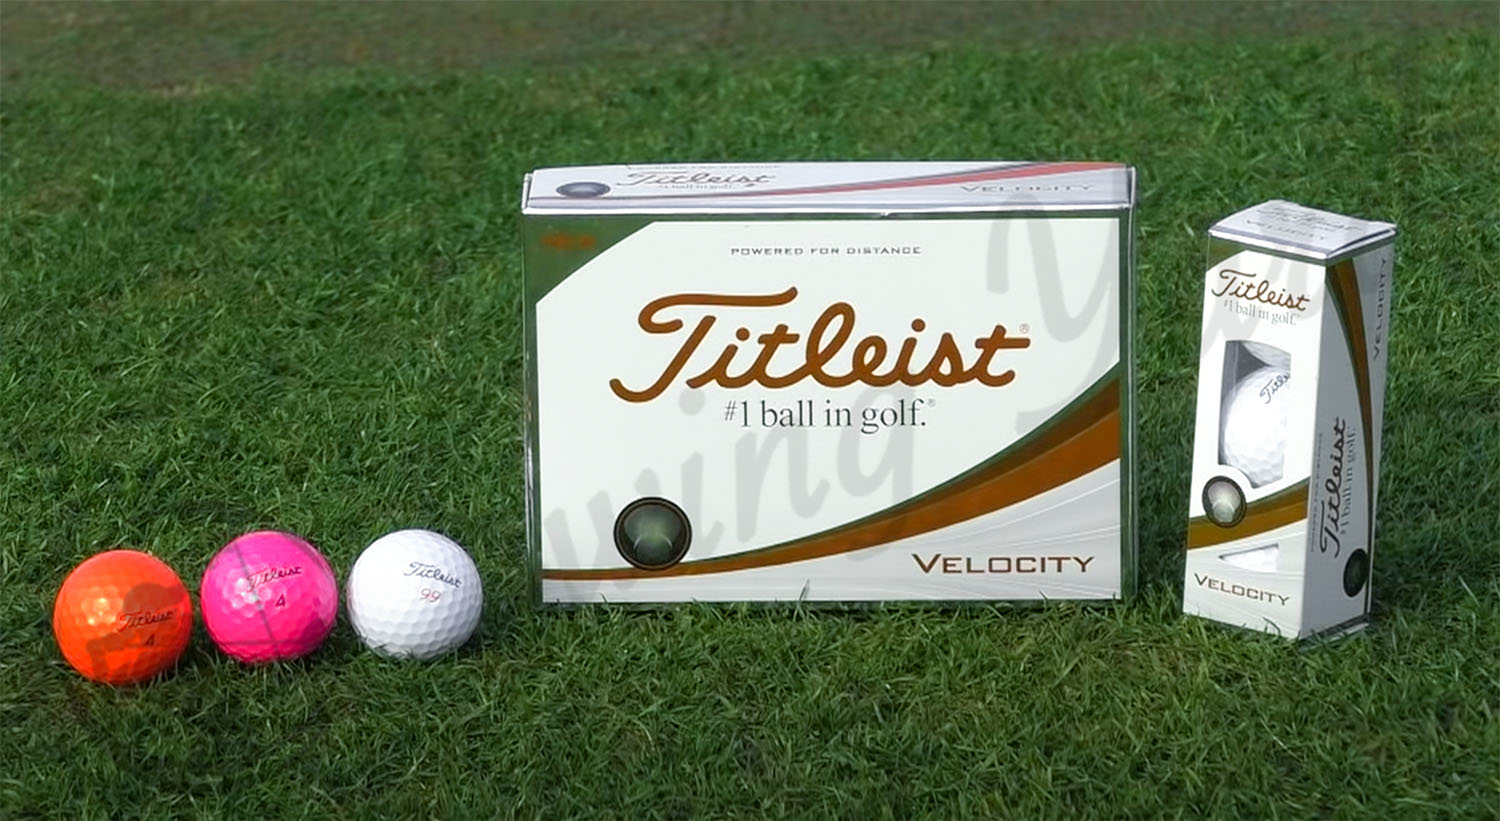 My new Titleist Velocity box and single pack at the golf course